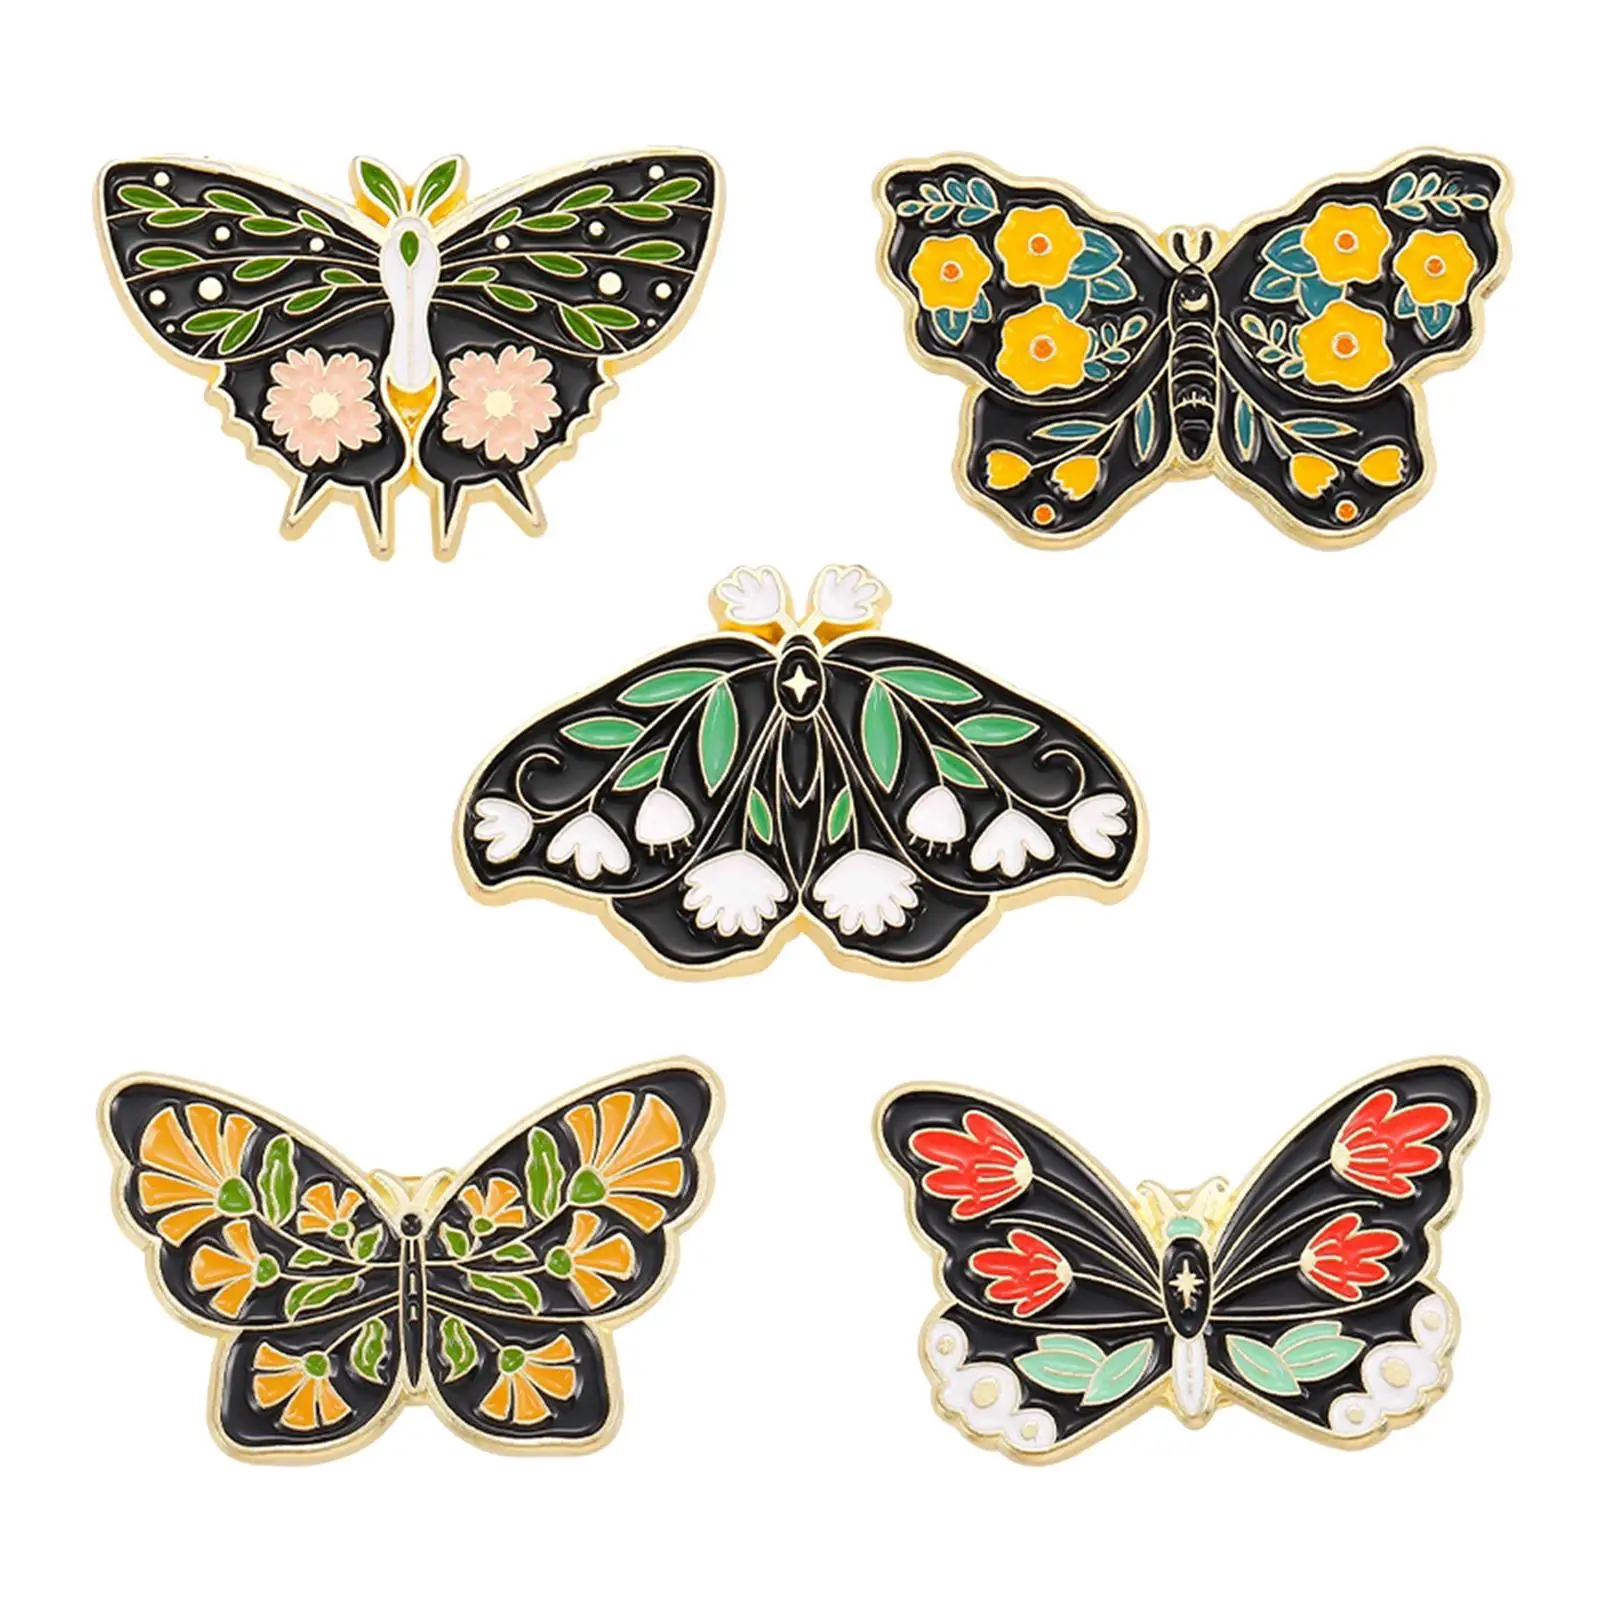 5x Butterfly Brooch Enamel Pins Decorative Jewelry Lapel Men Women Alloy Brooch for Jackets Clothes Holiday Wedding Party